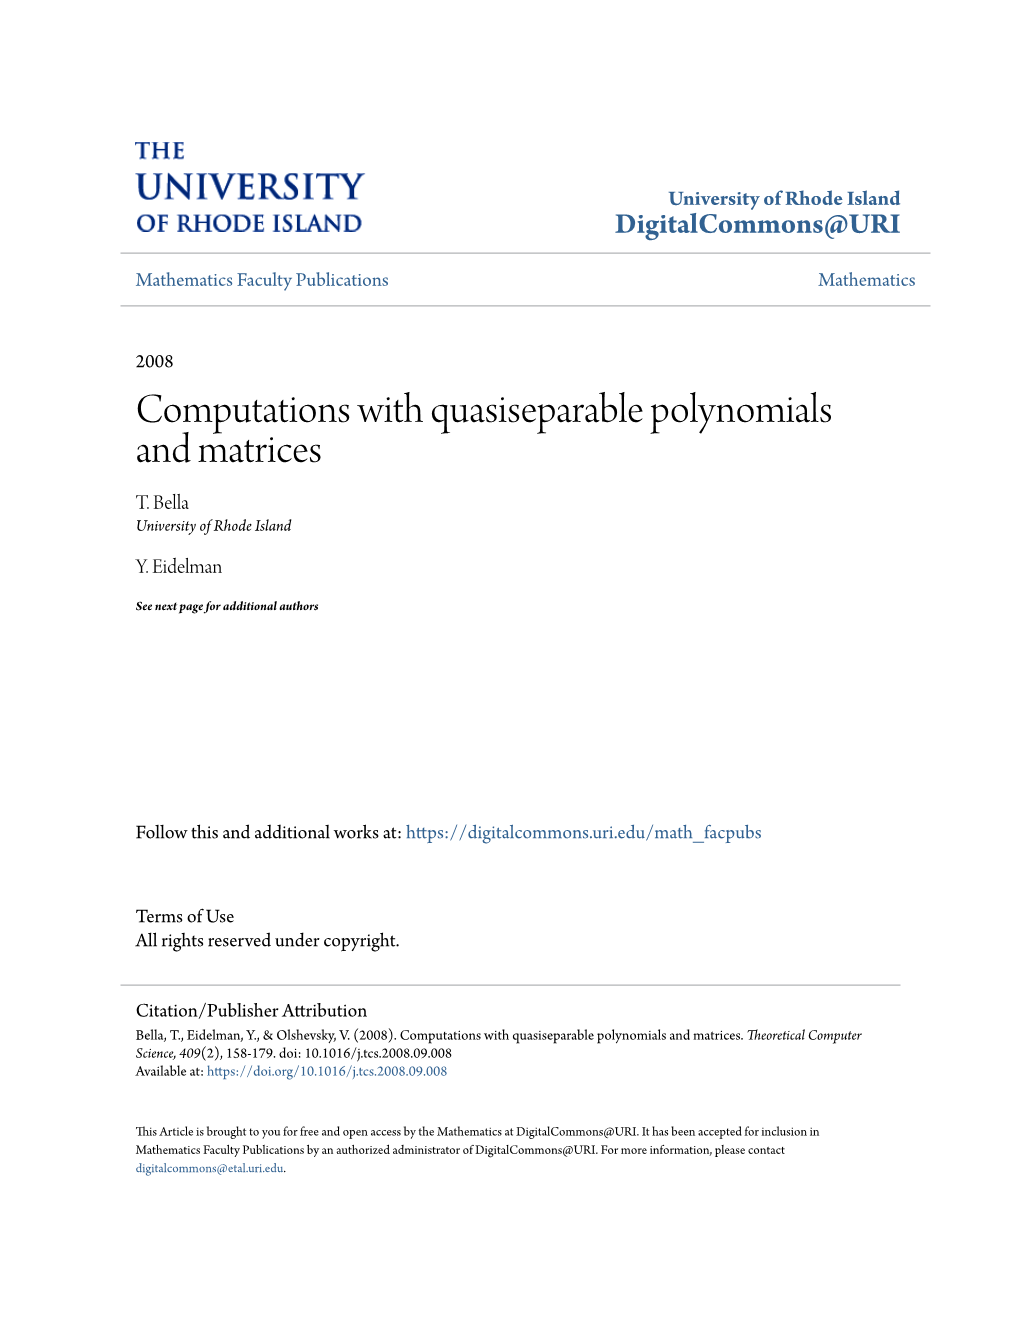 Computations with Quasiseparable Polynomials and Matrices T